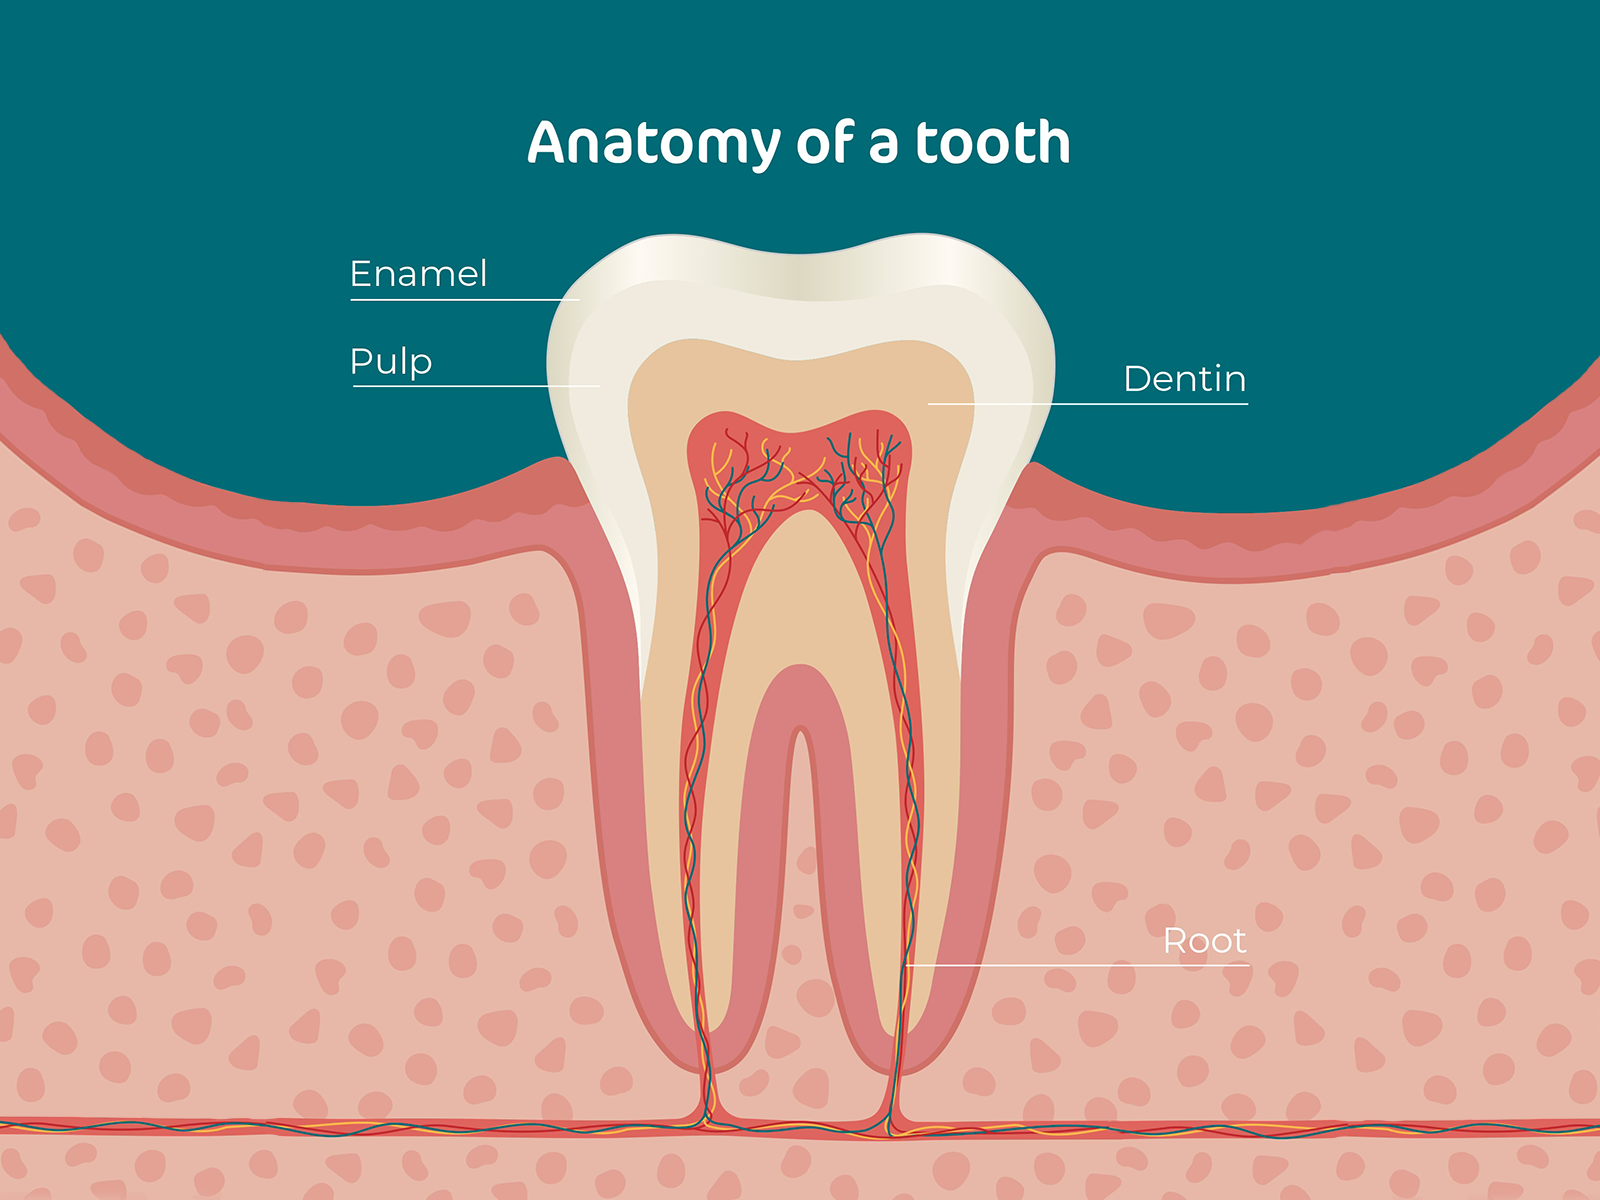 An illustration of the anatomy of a tooth